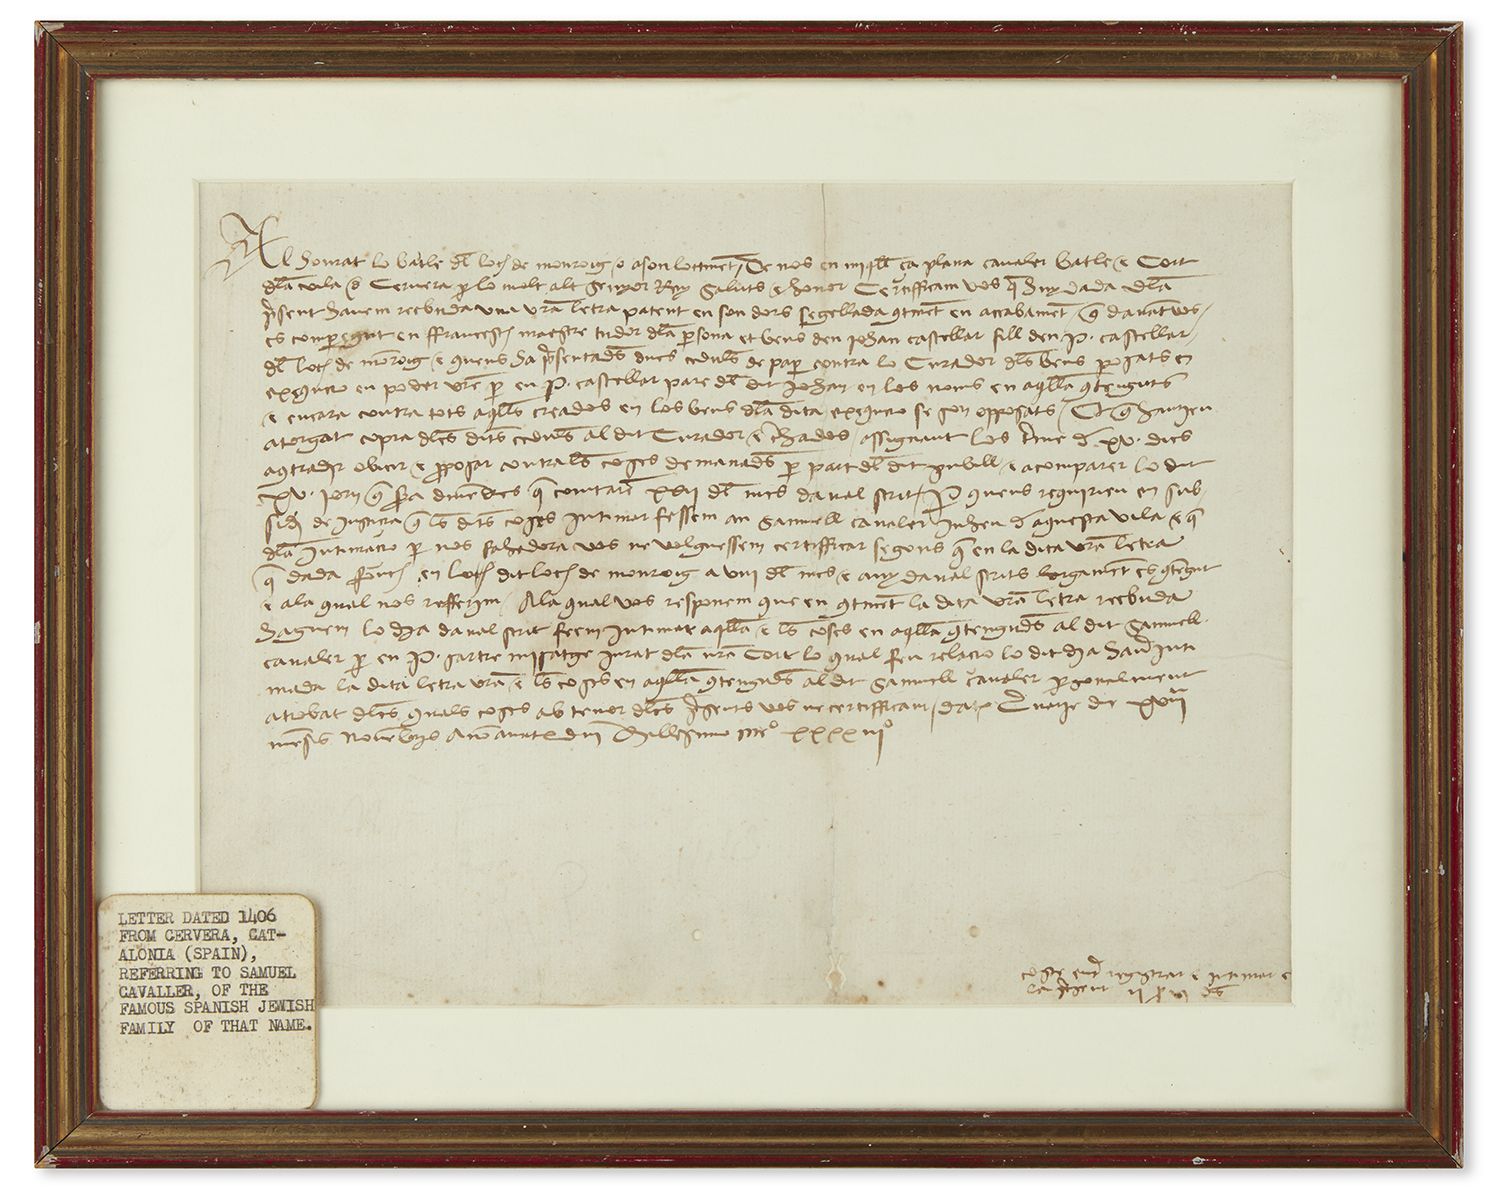 Notification document of the Bailiff of the Court of Cervera concerning Samuel Cavaller(ia)